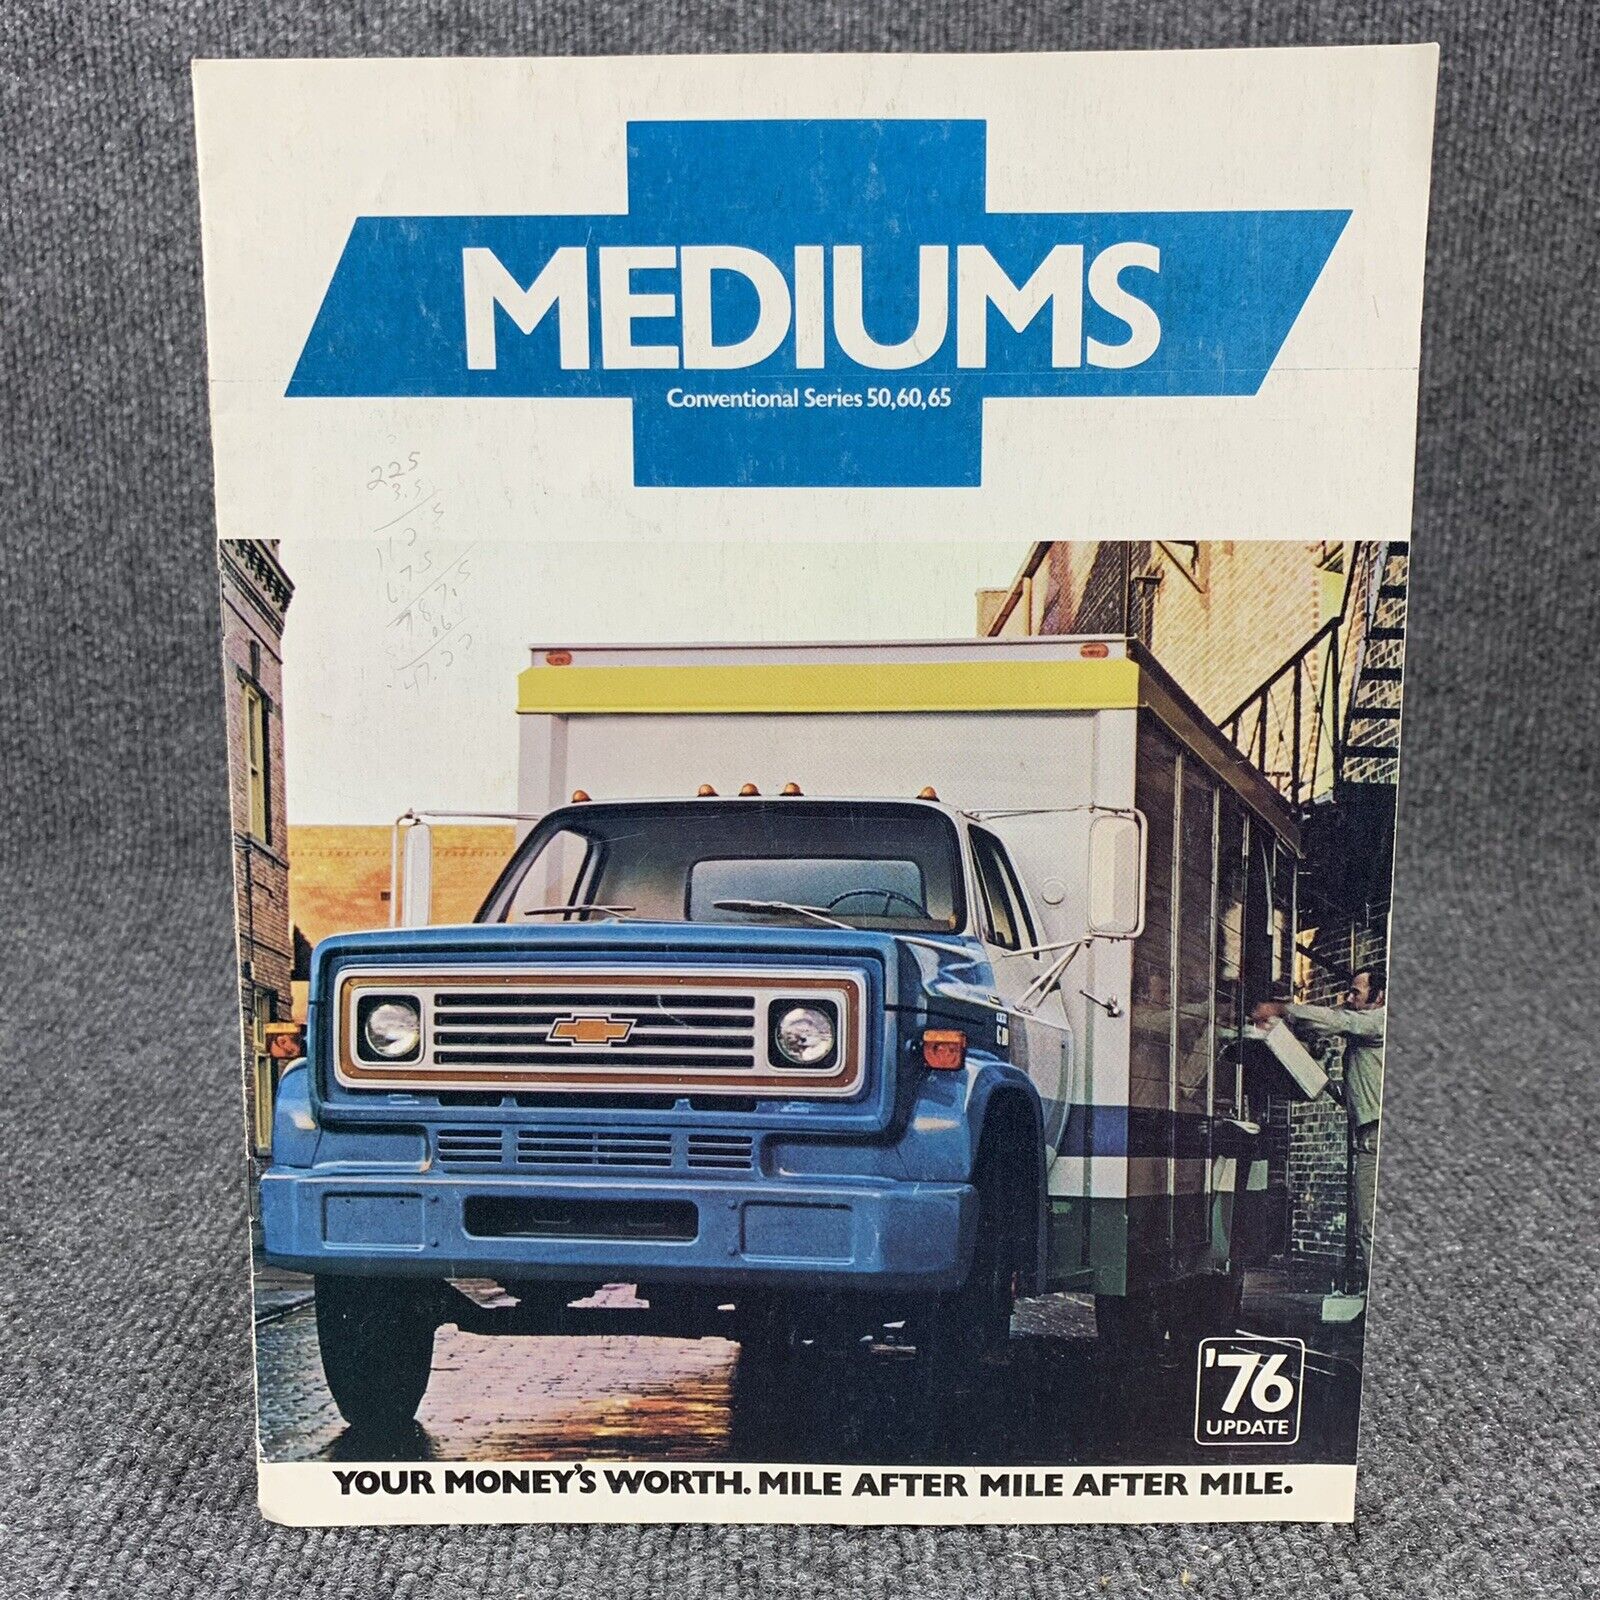 Vintage 1976 Chevrolet Mediums Conventional Series 50, 60, 65 Brochure Ad Chevy